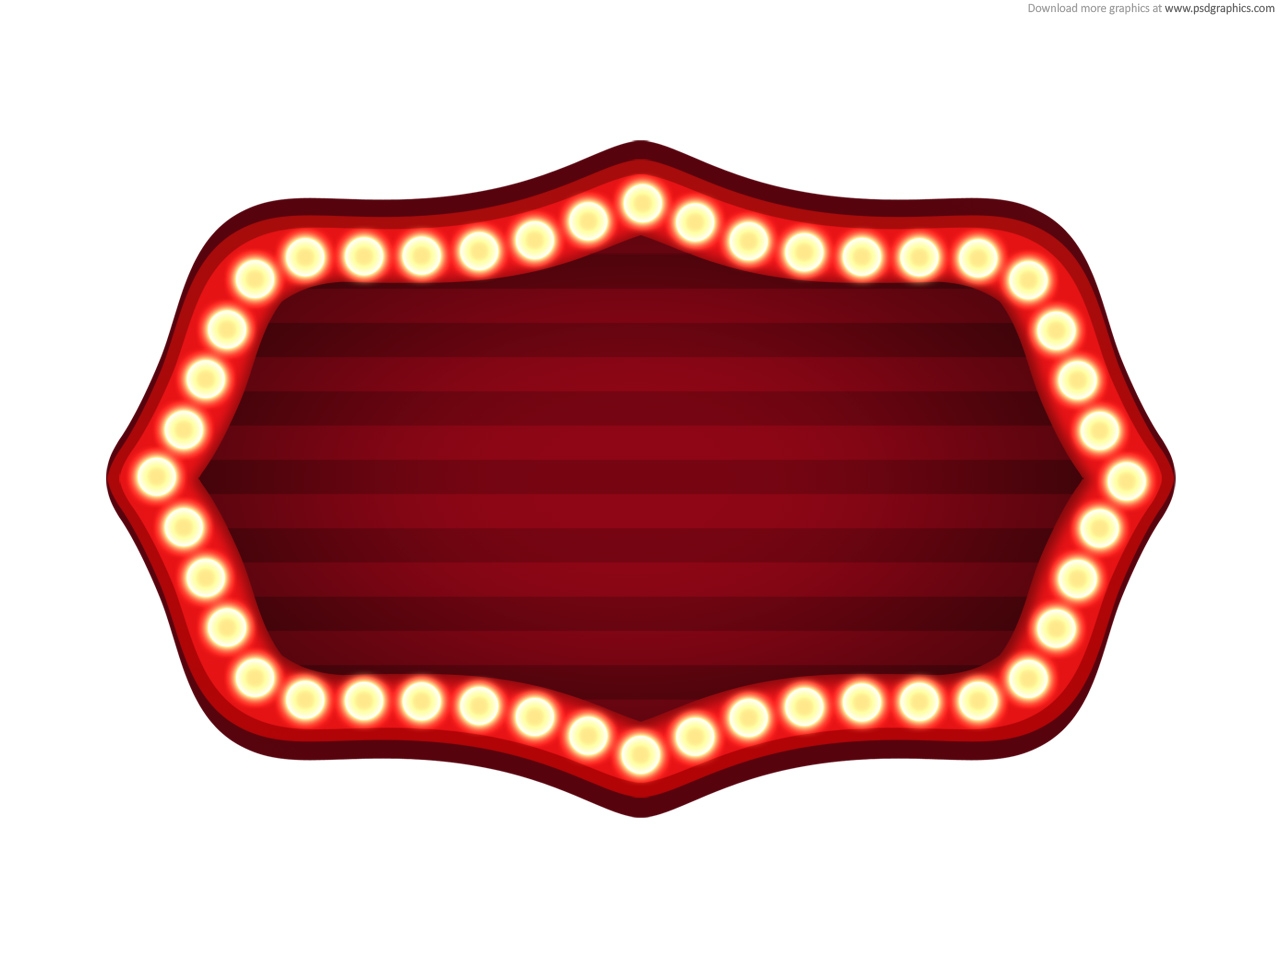 Free Marquee Lights Cliparts, Download Free Clip Art, Free.